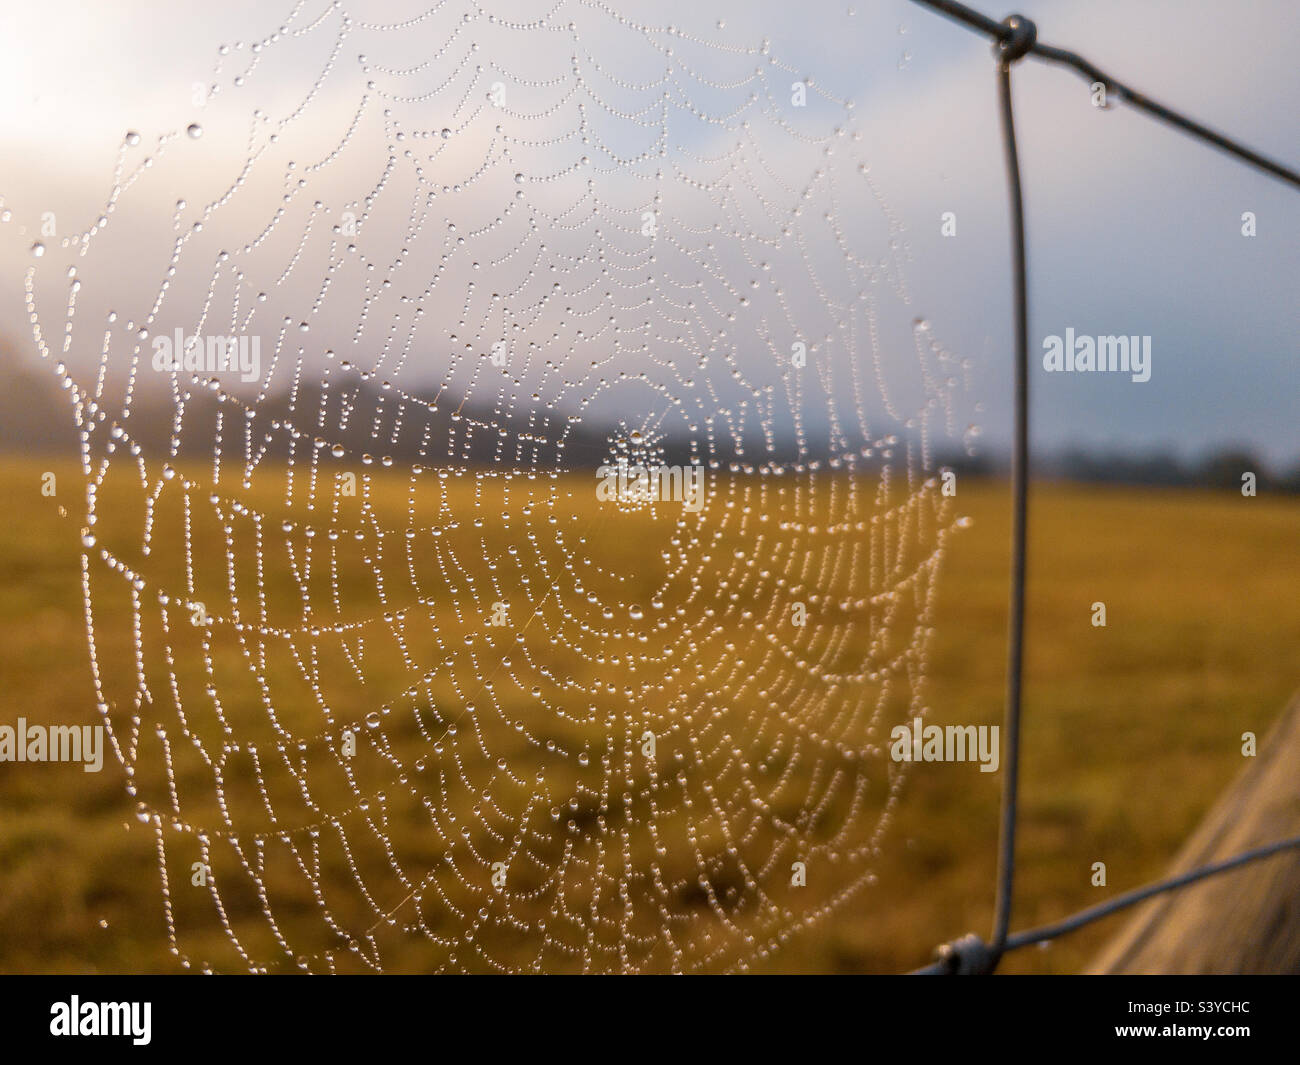 Early morning dew covered cobweb on a wire fence Stock Photo